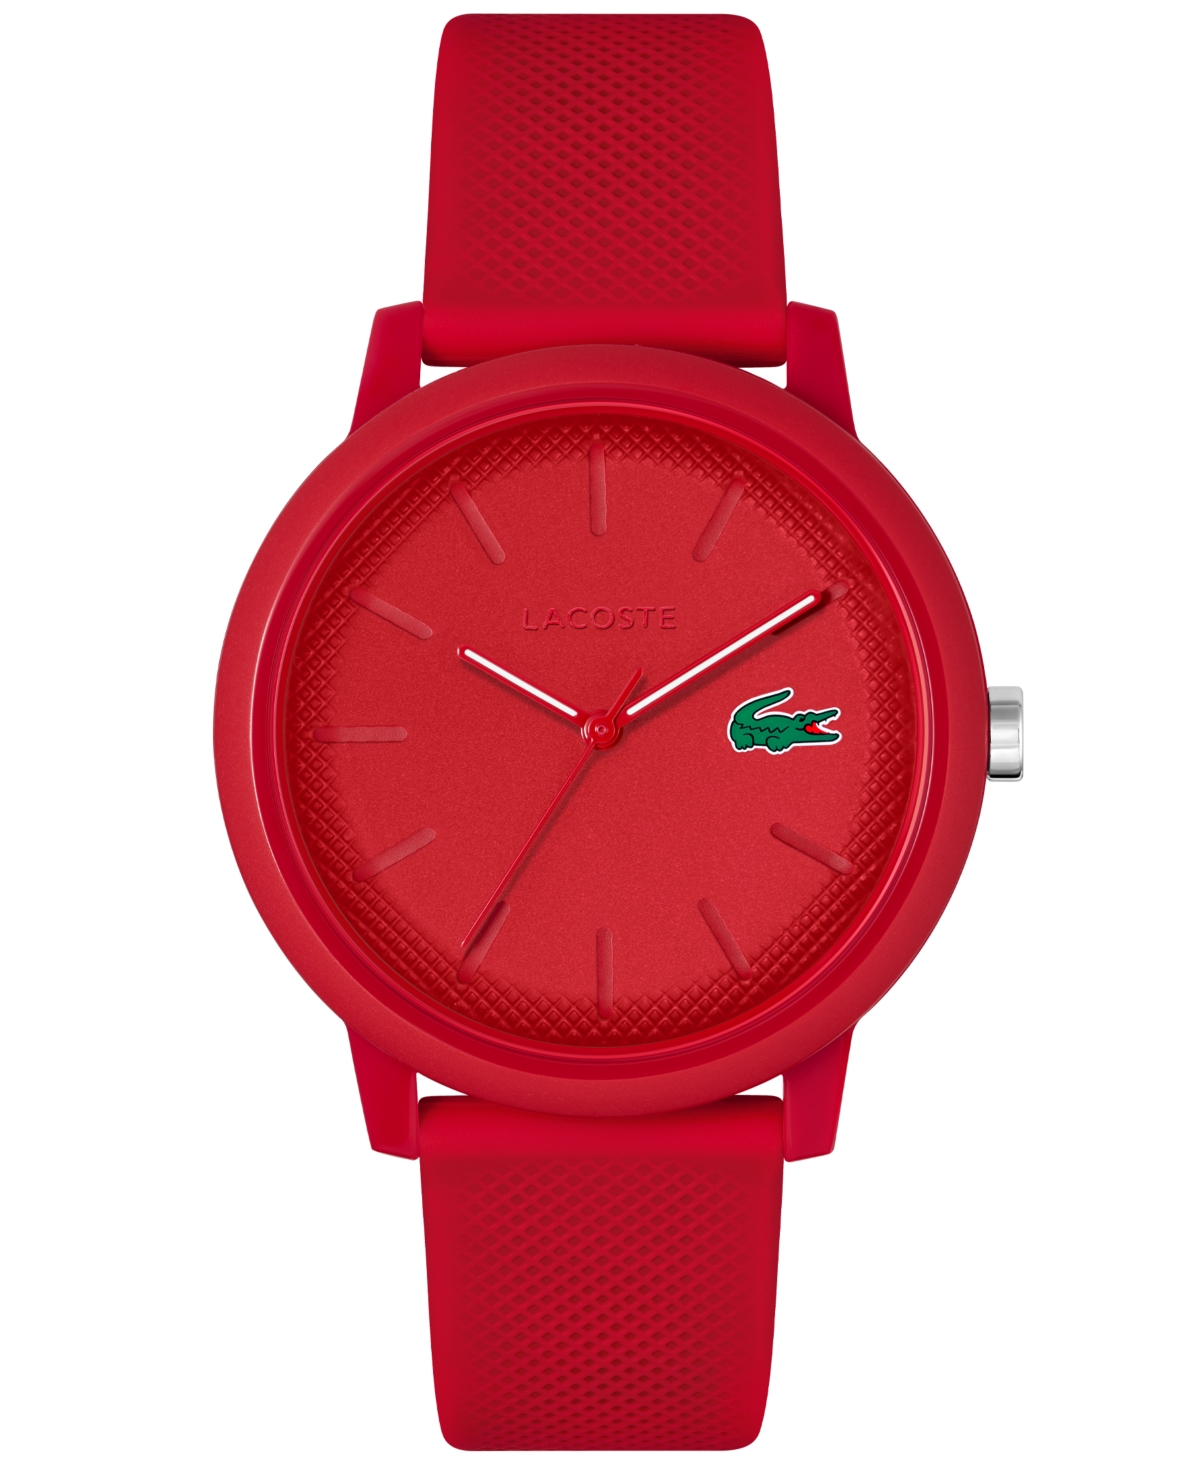 Men's L.12.12 Red Silicone Strap Watch 42mm - Red